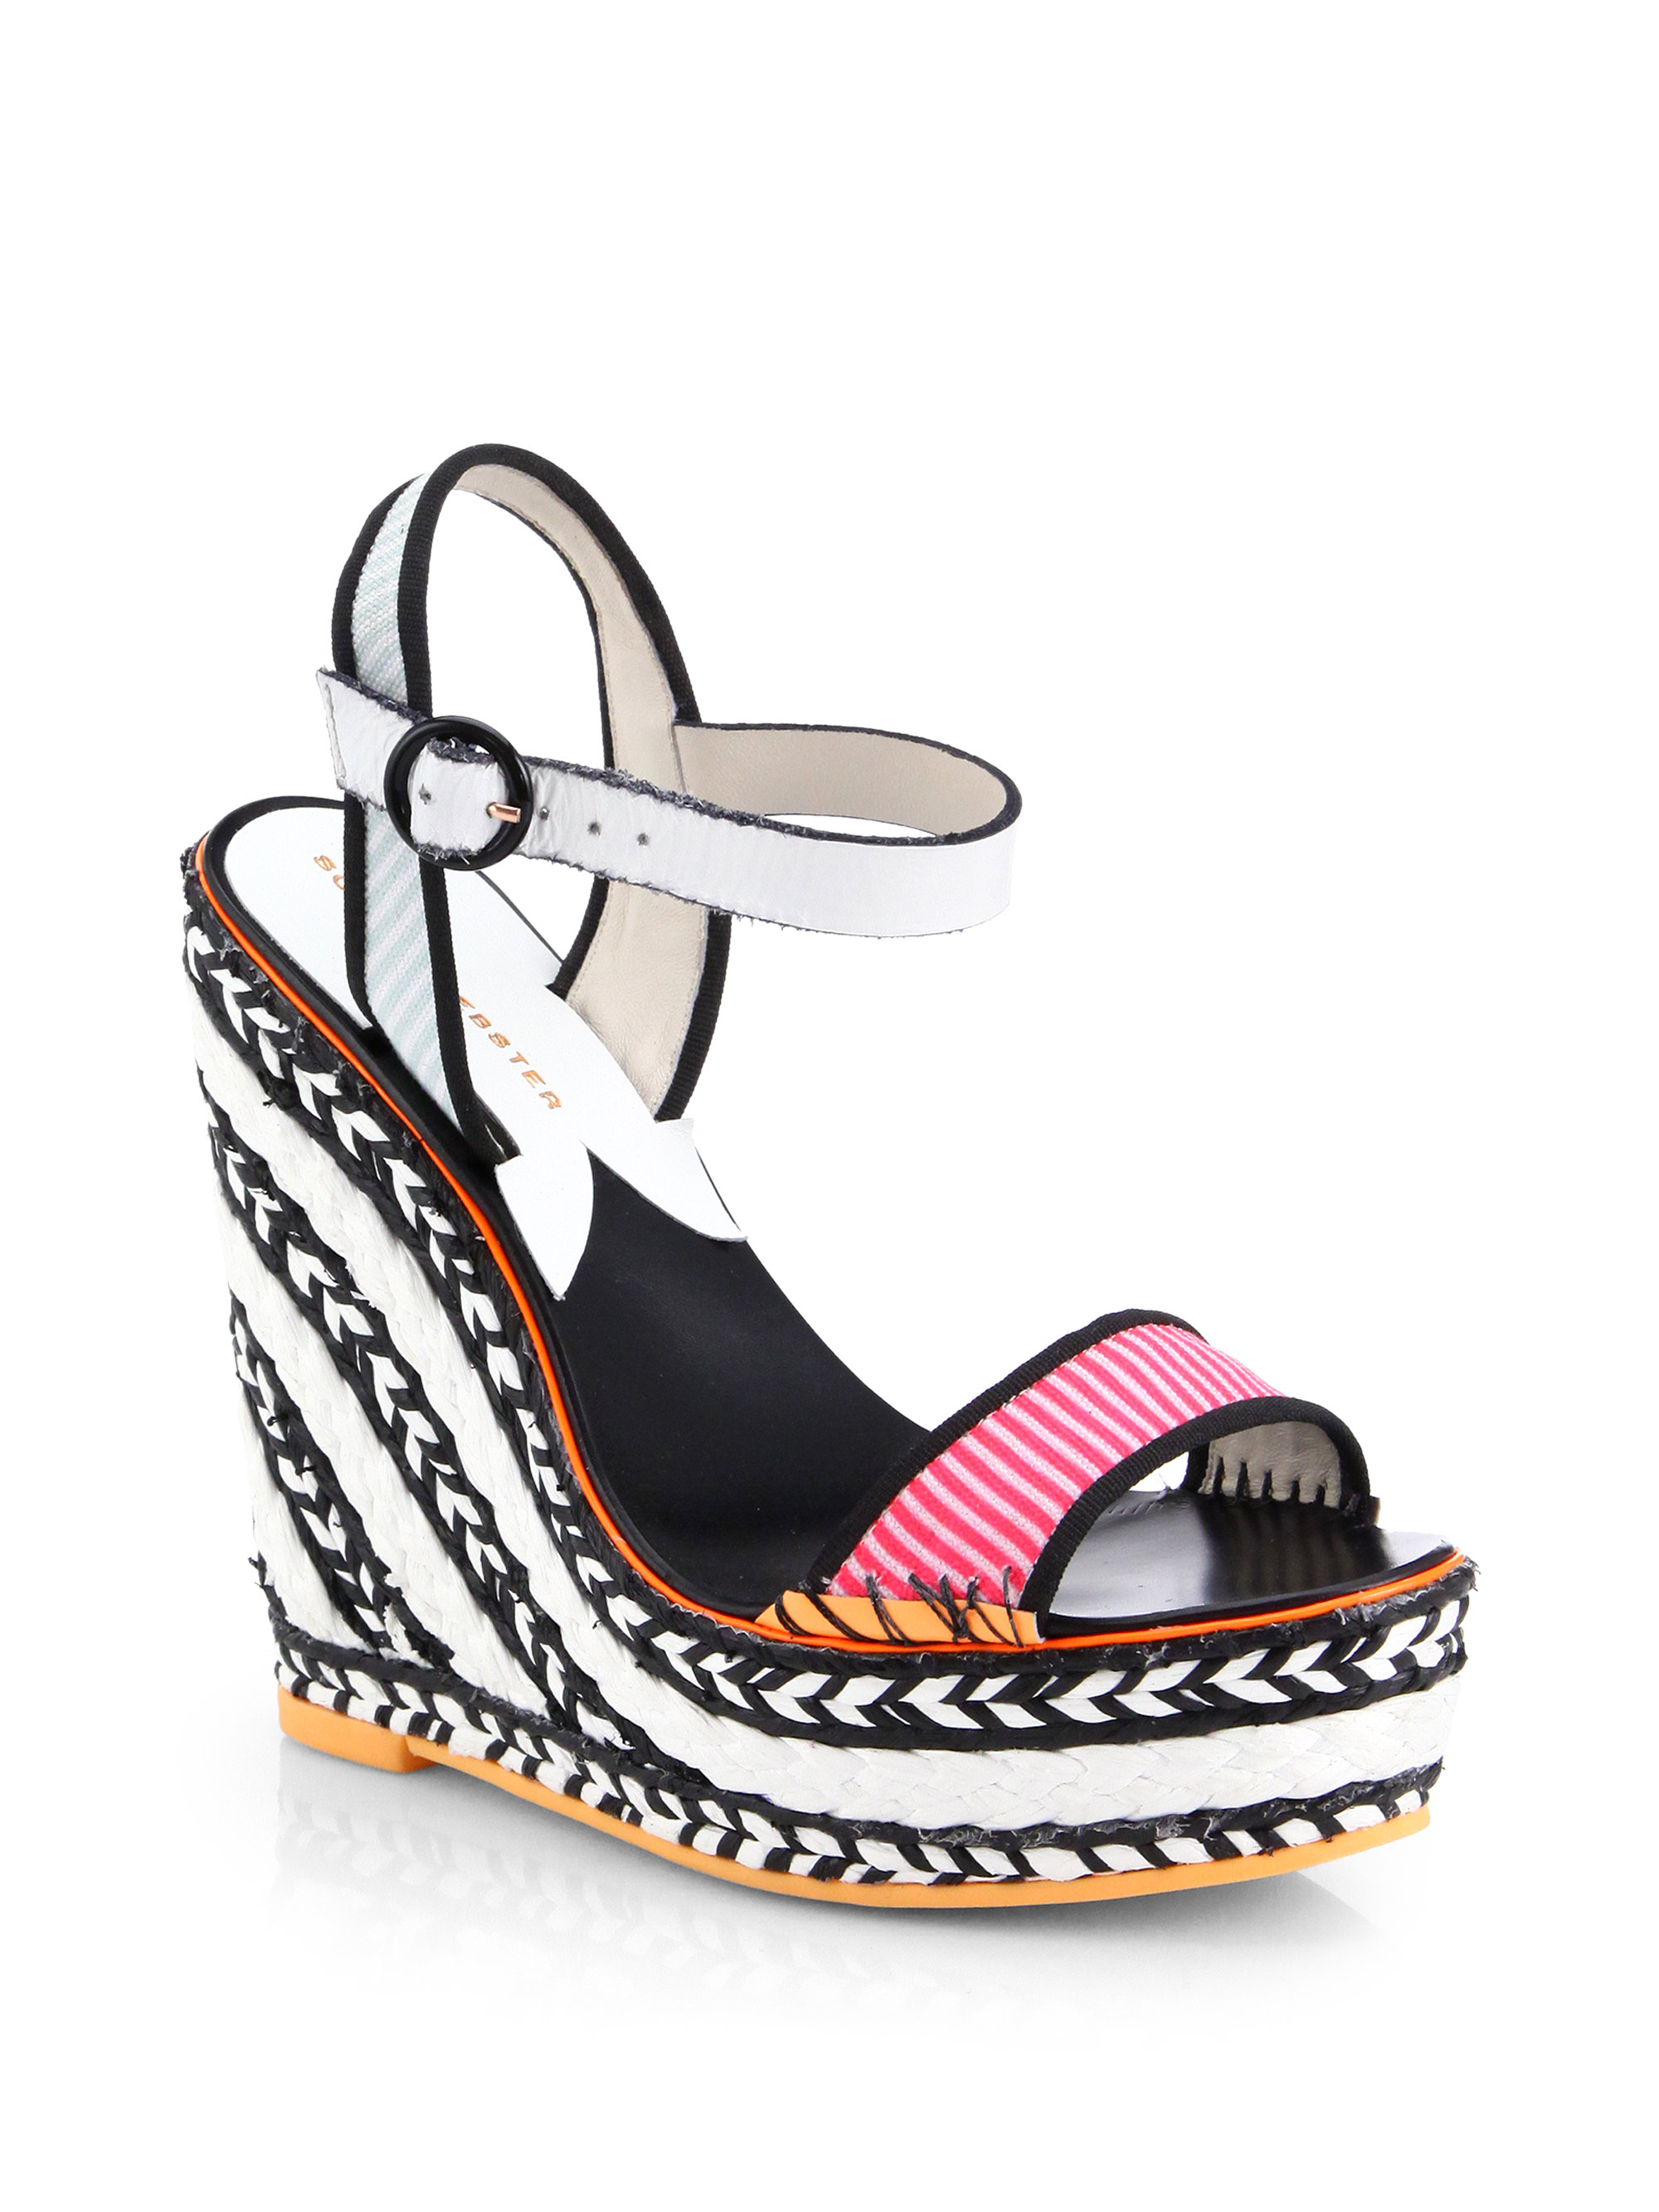 Sophia Webster Lucita Canvas Braided Wedge Sandals in Multicolor (PINK ...